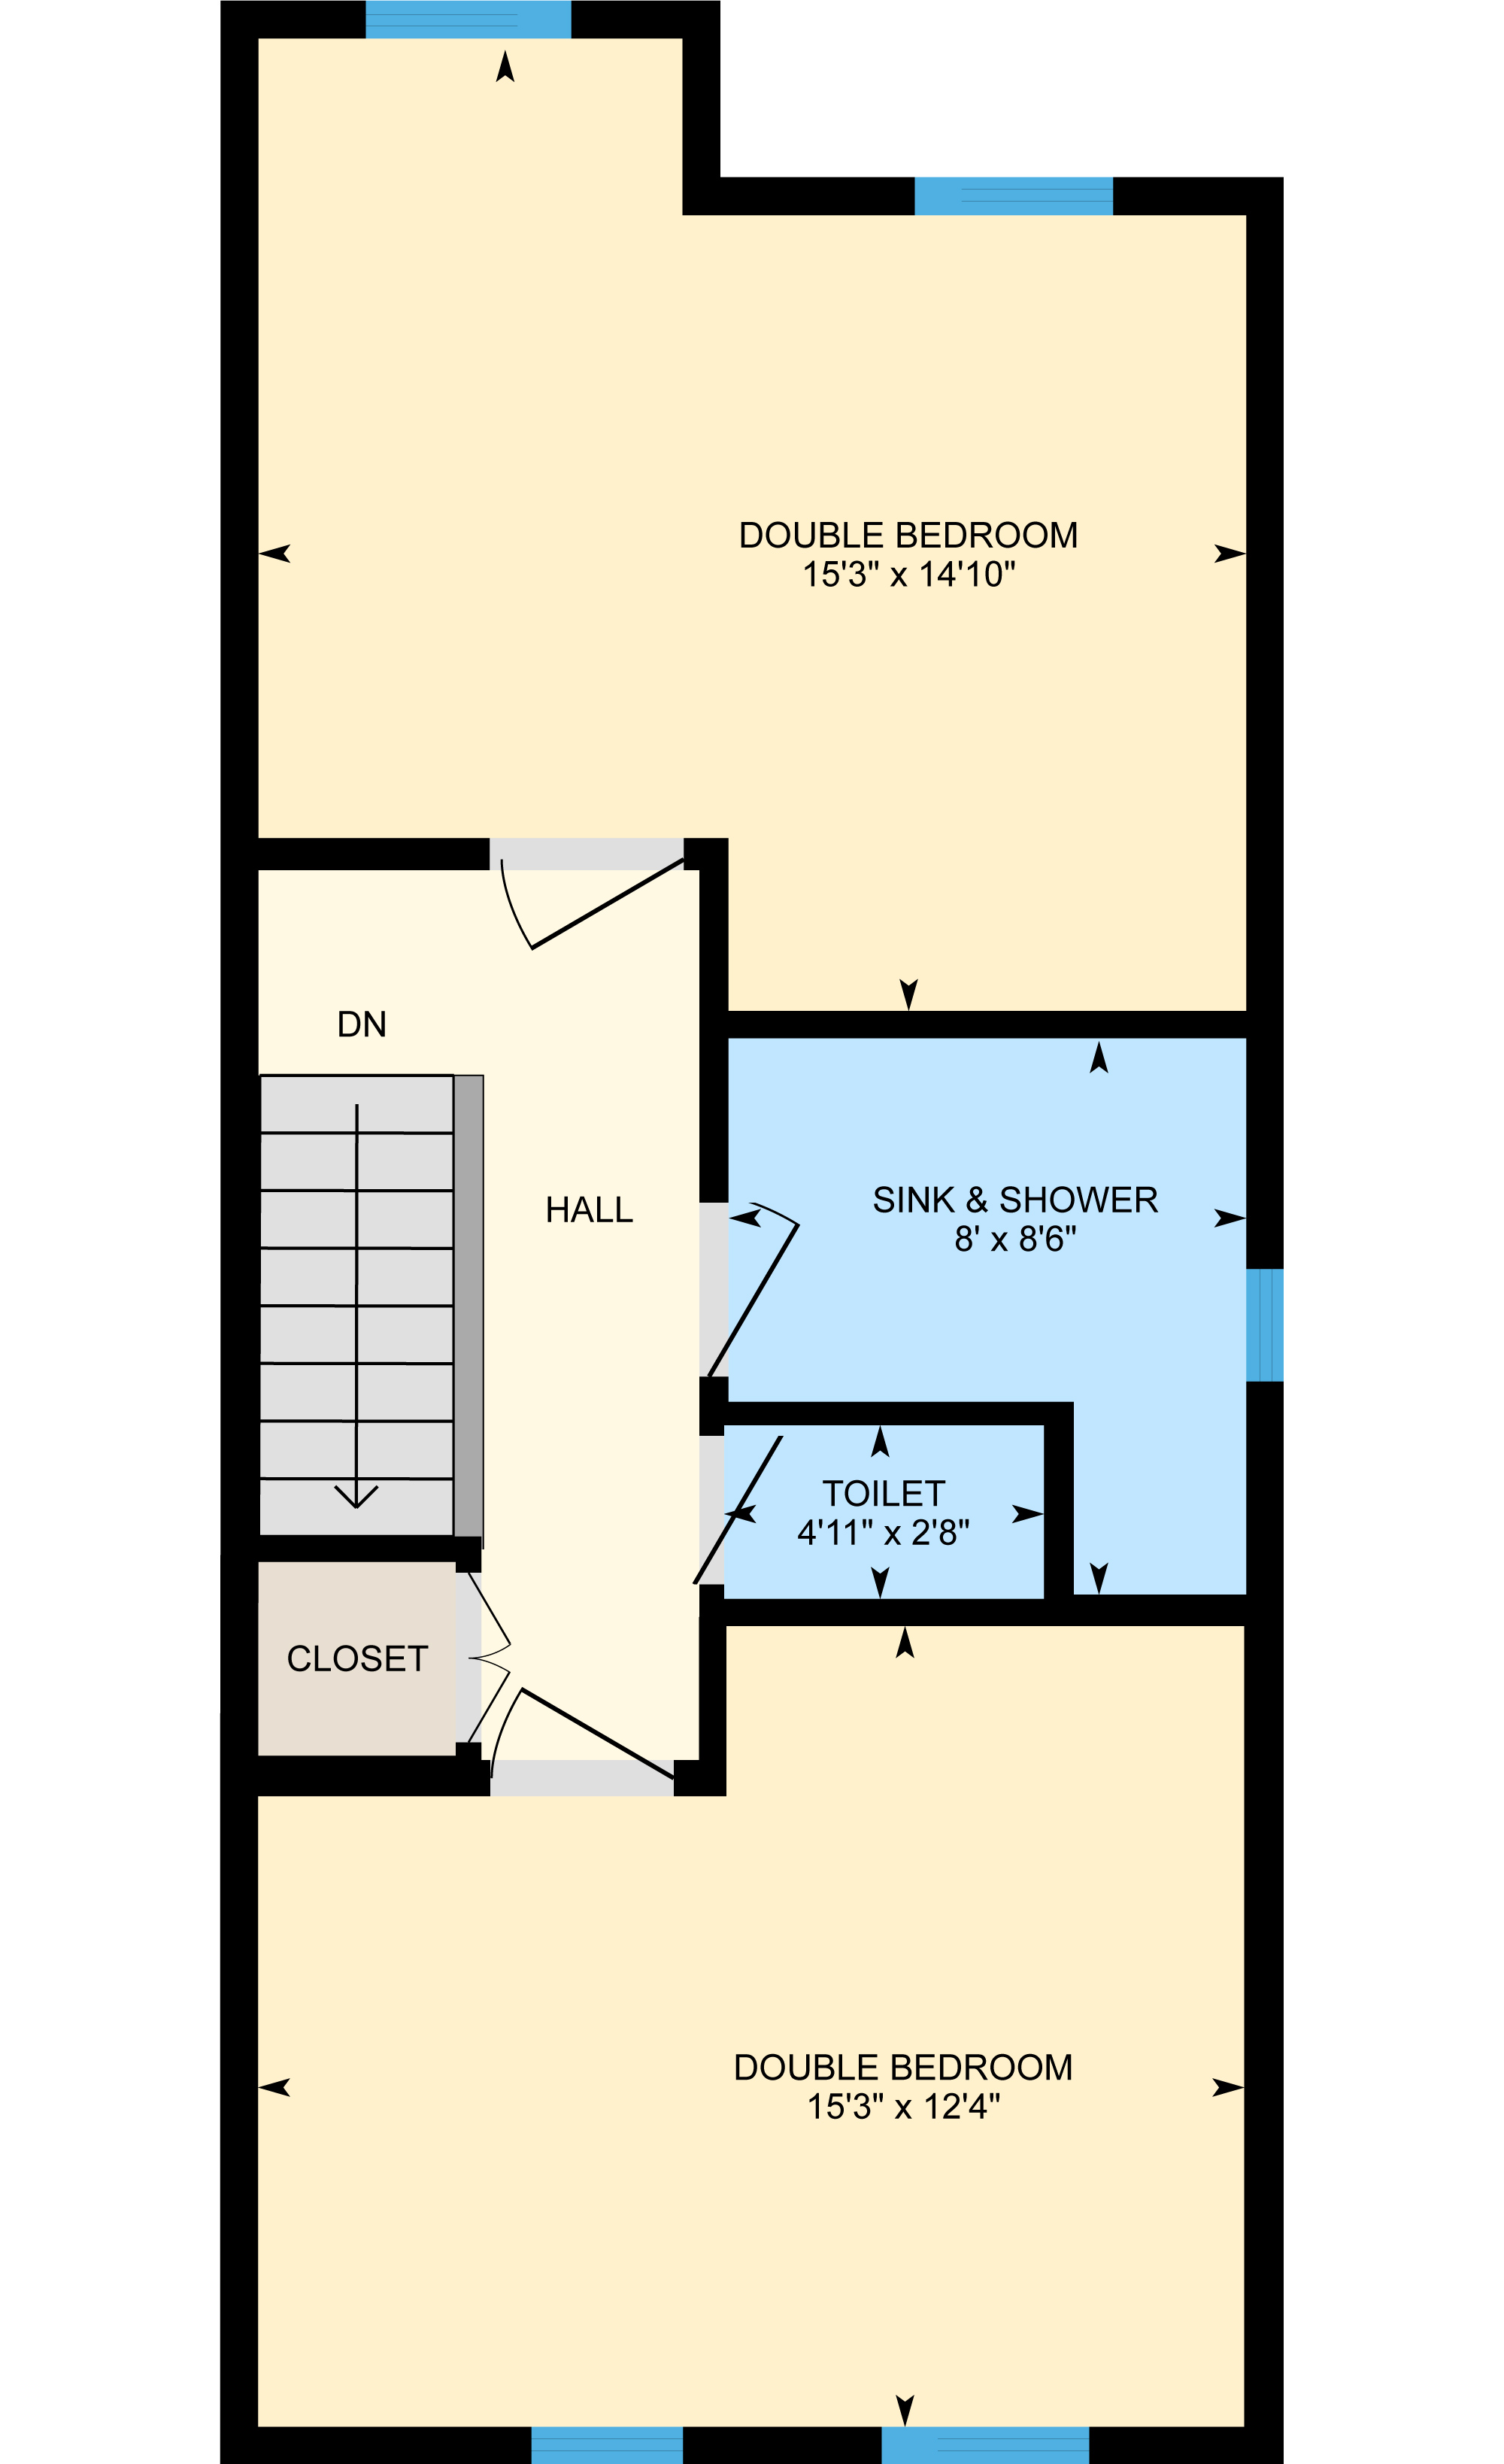 Second level floor plan for the Townhouse Apartments